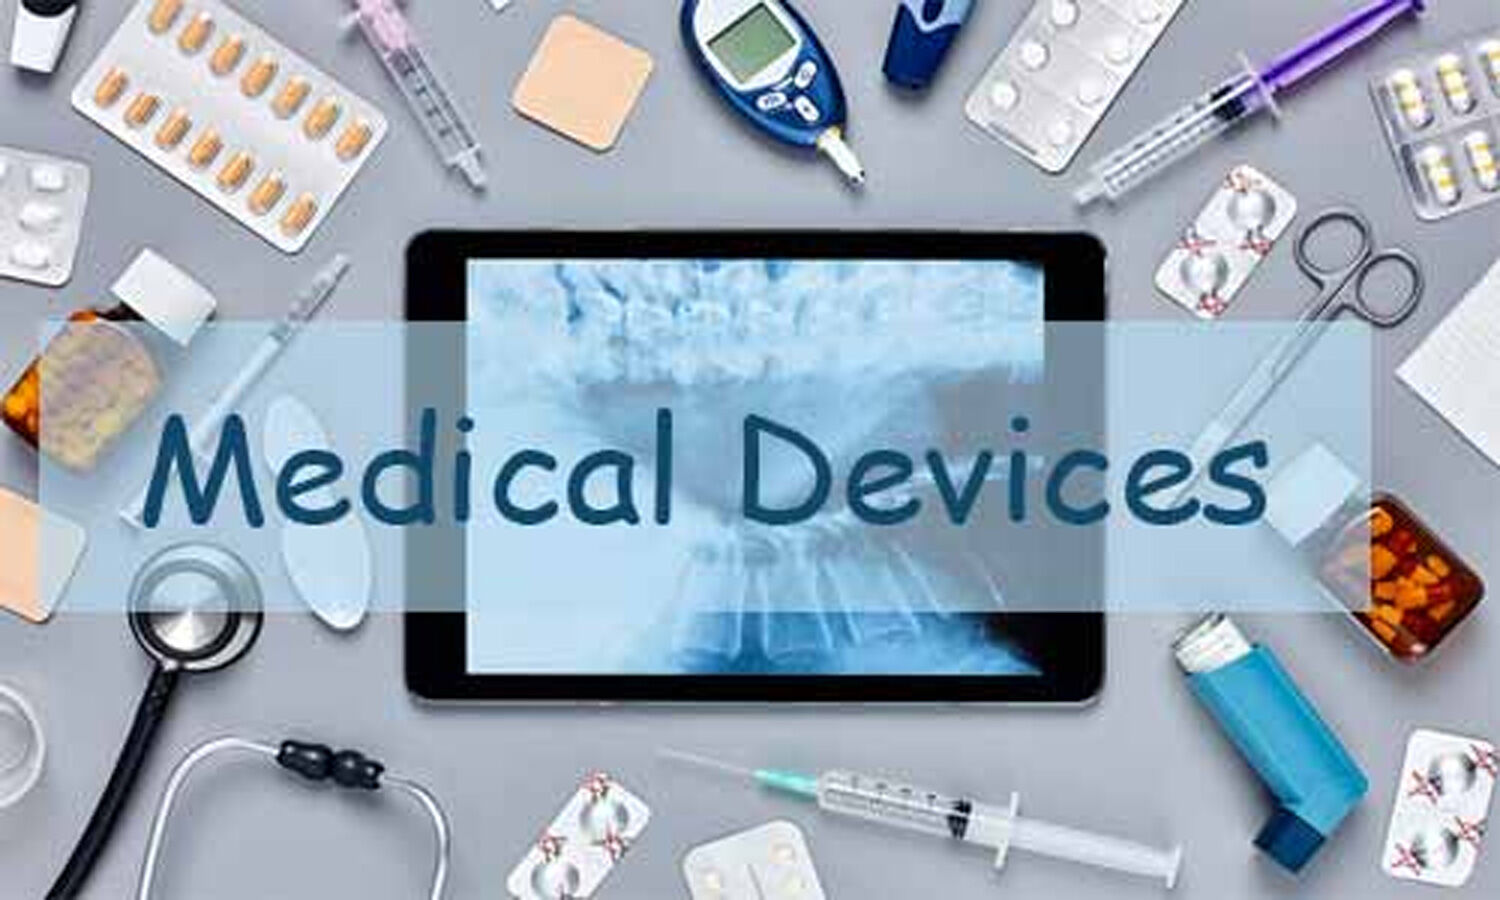 Cabinet approves big package for promotion of Domestic Manufacturing of Medical Devices, details